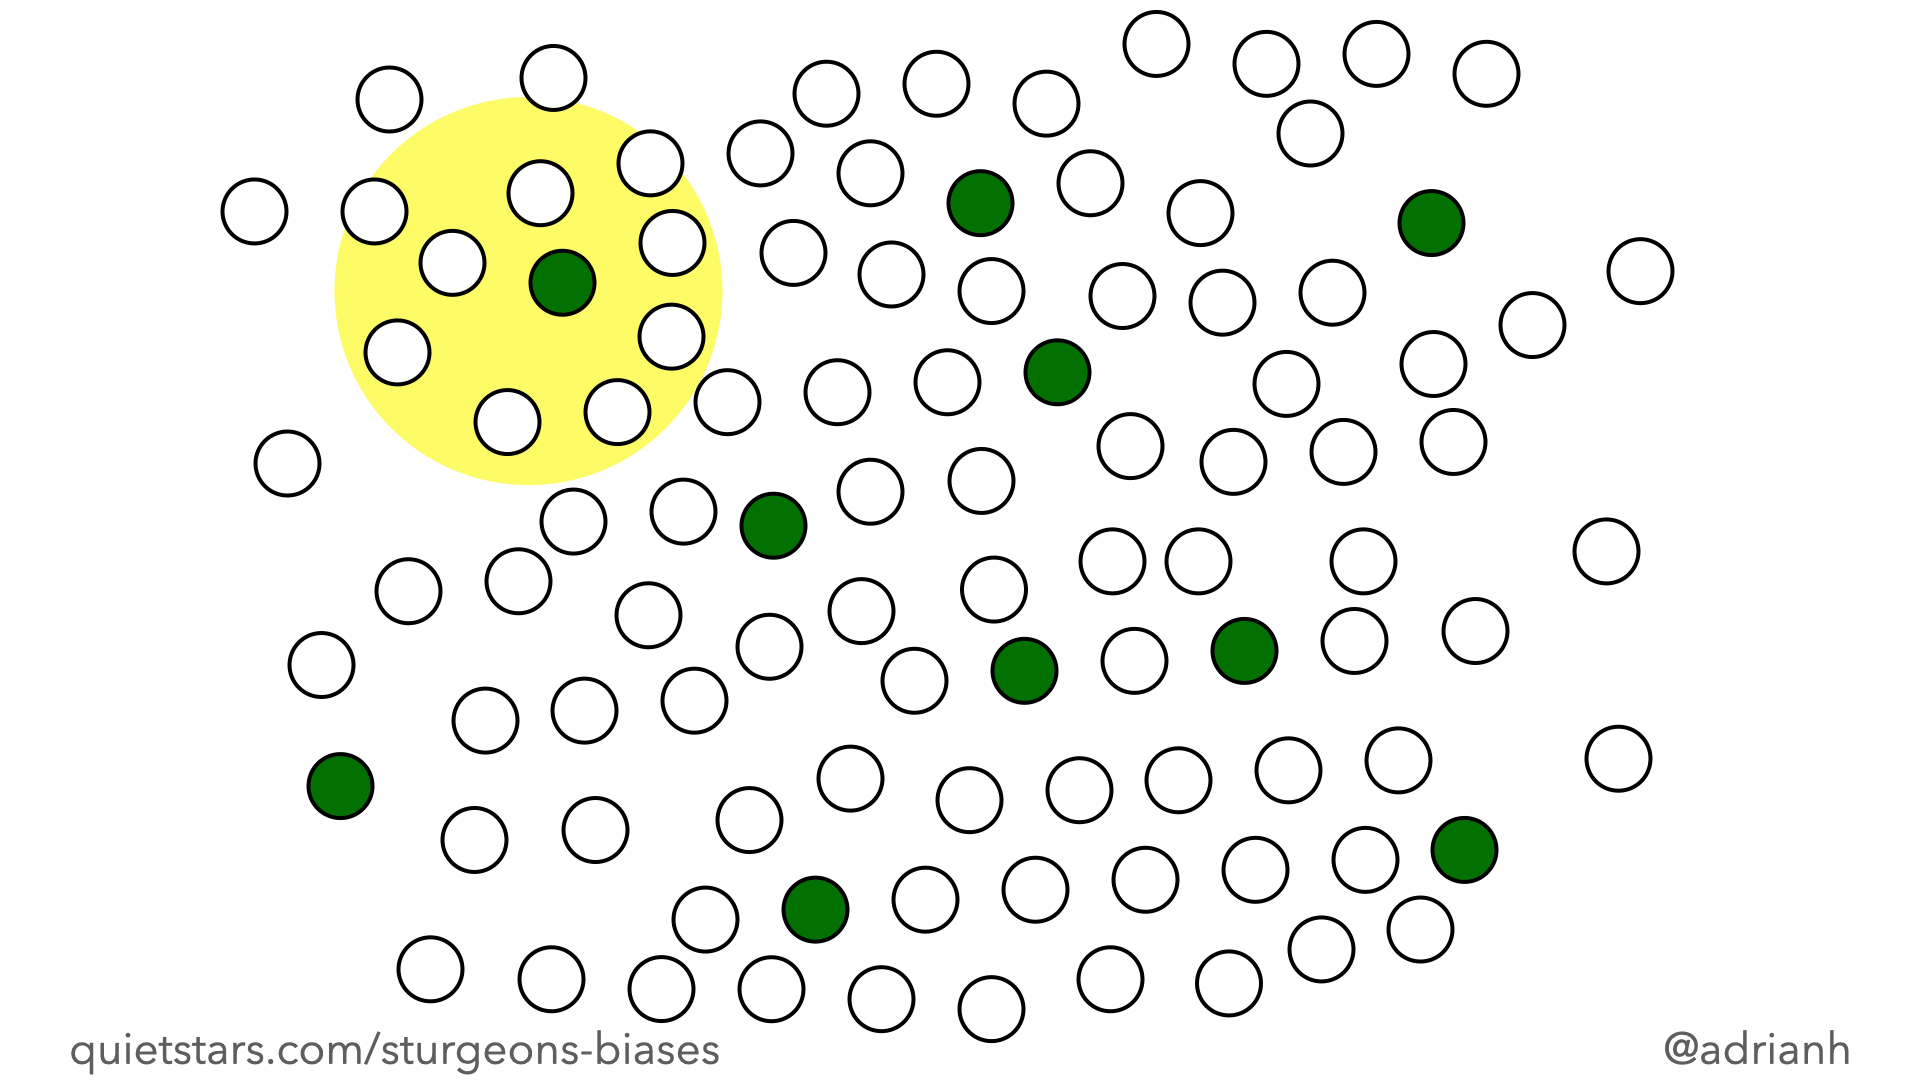 One hundred circles randomly spread. Ninety of them are white and ten are green. The green circles are spread evenly among the white. Ten circles are highlighted in yellow — one green and nine white.